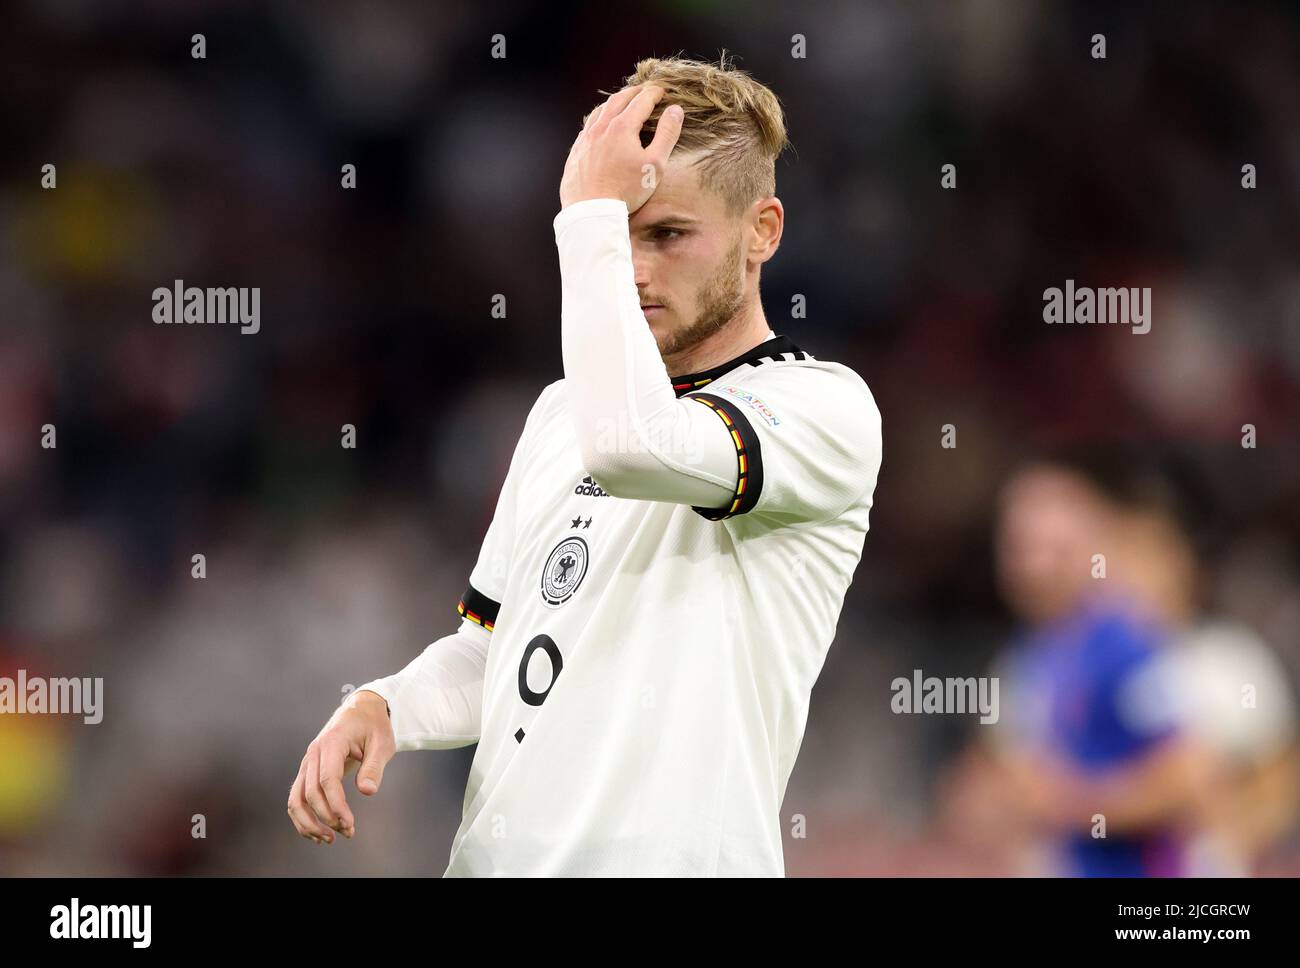 Timo Werner  of Germany  MUNICH, GERMANY - JUNE 07:  UEFA Nations League League A Group 3 match between Germany and England at Allianz Arena on June 07, 2022 in Munich, Germany. Nations League Deutschland England  © diebilderwelt / Alamy Stock Stock Photo